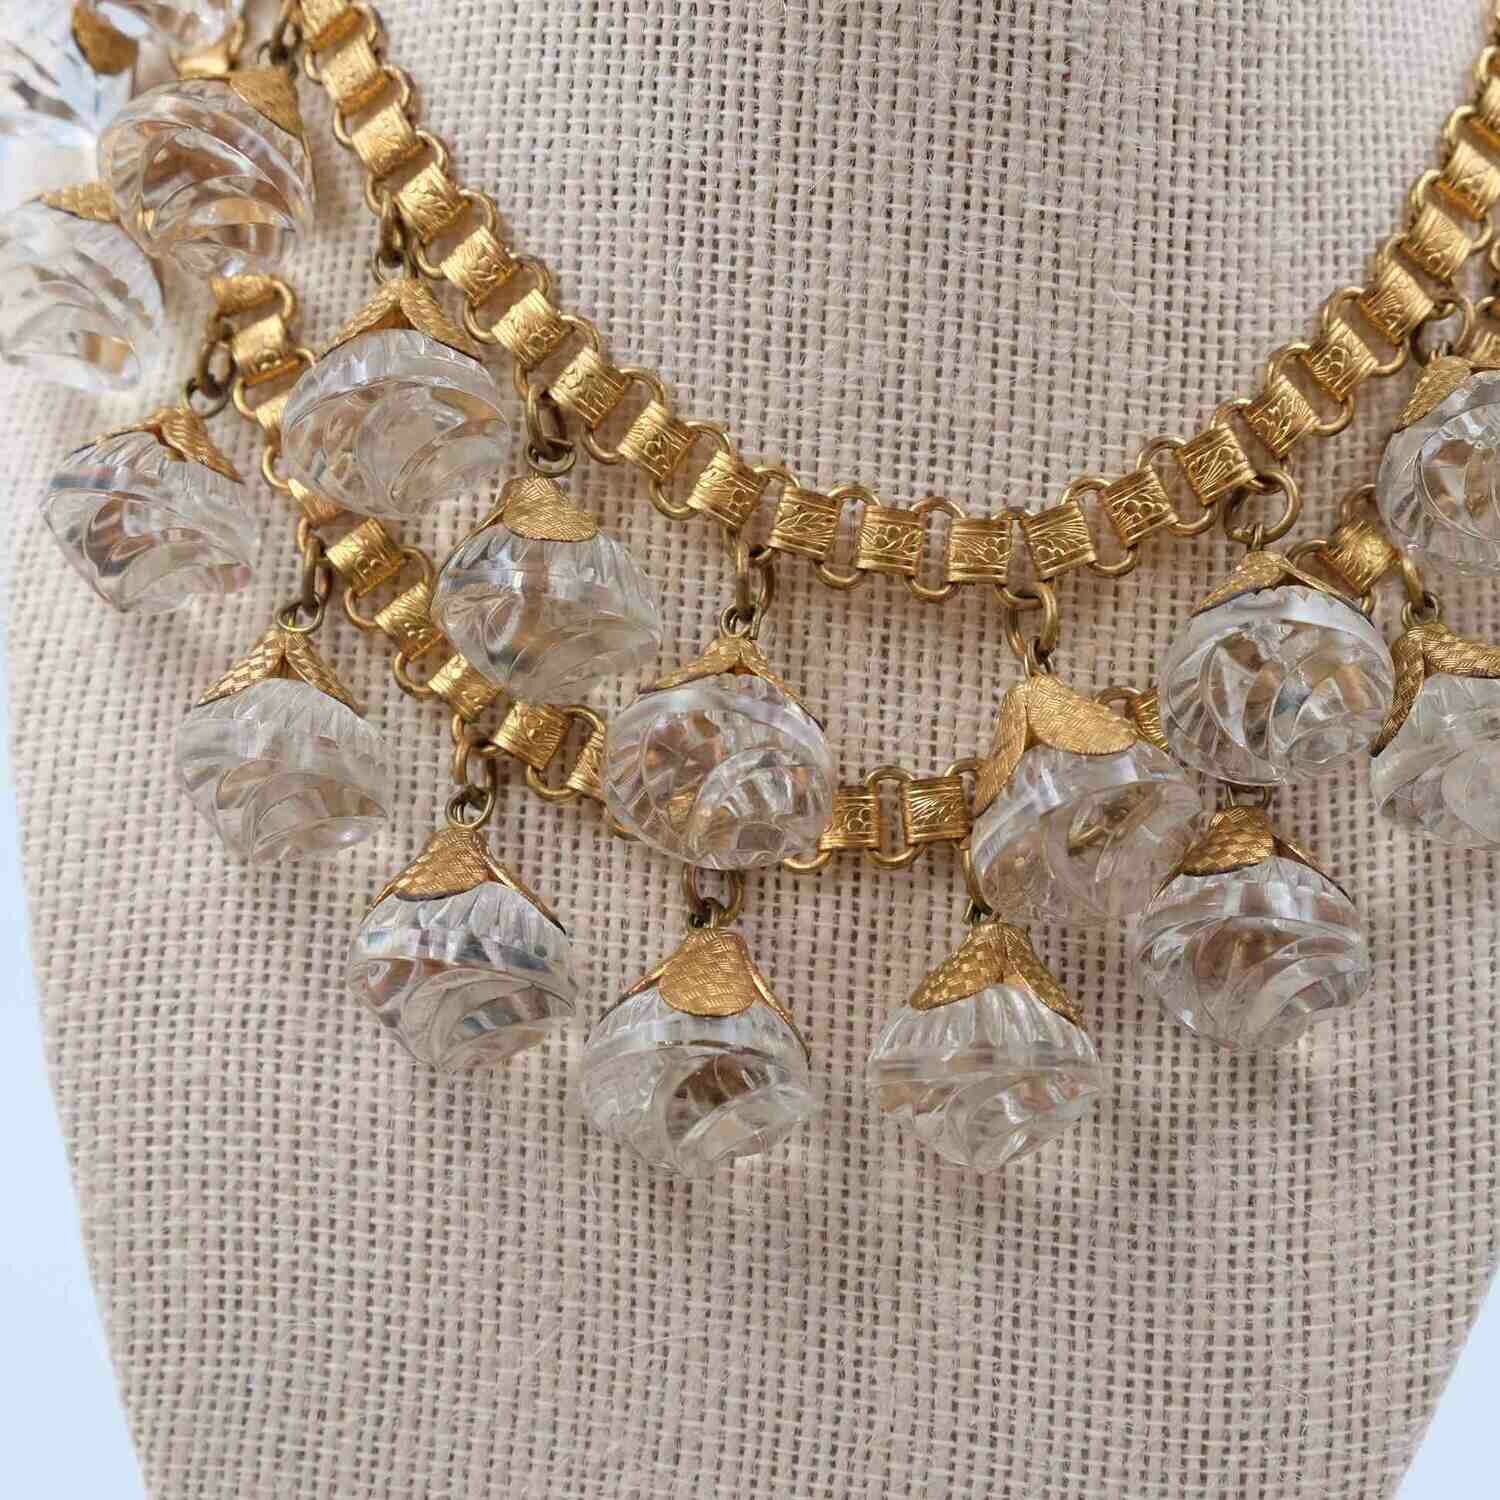 Vintage Early Miriam Haskell Glass Ball Necklace 1930s